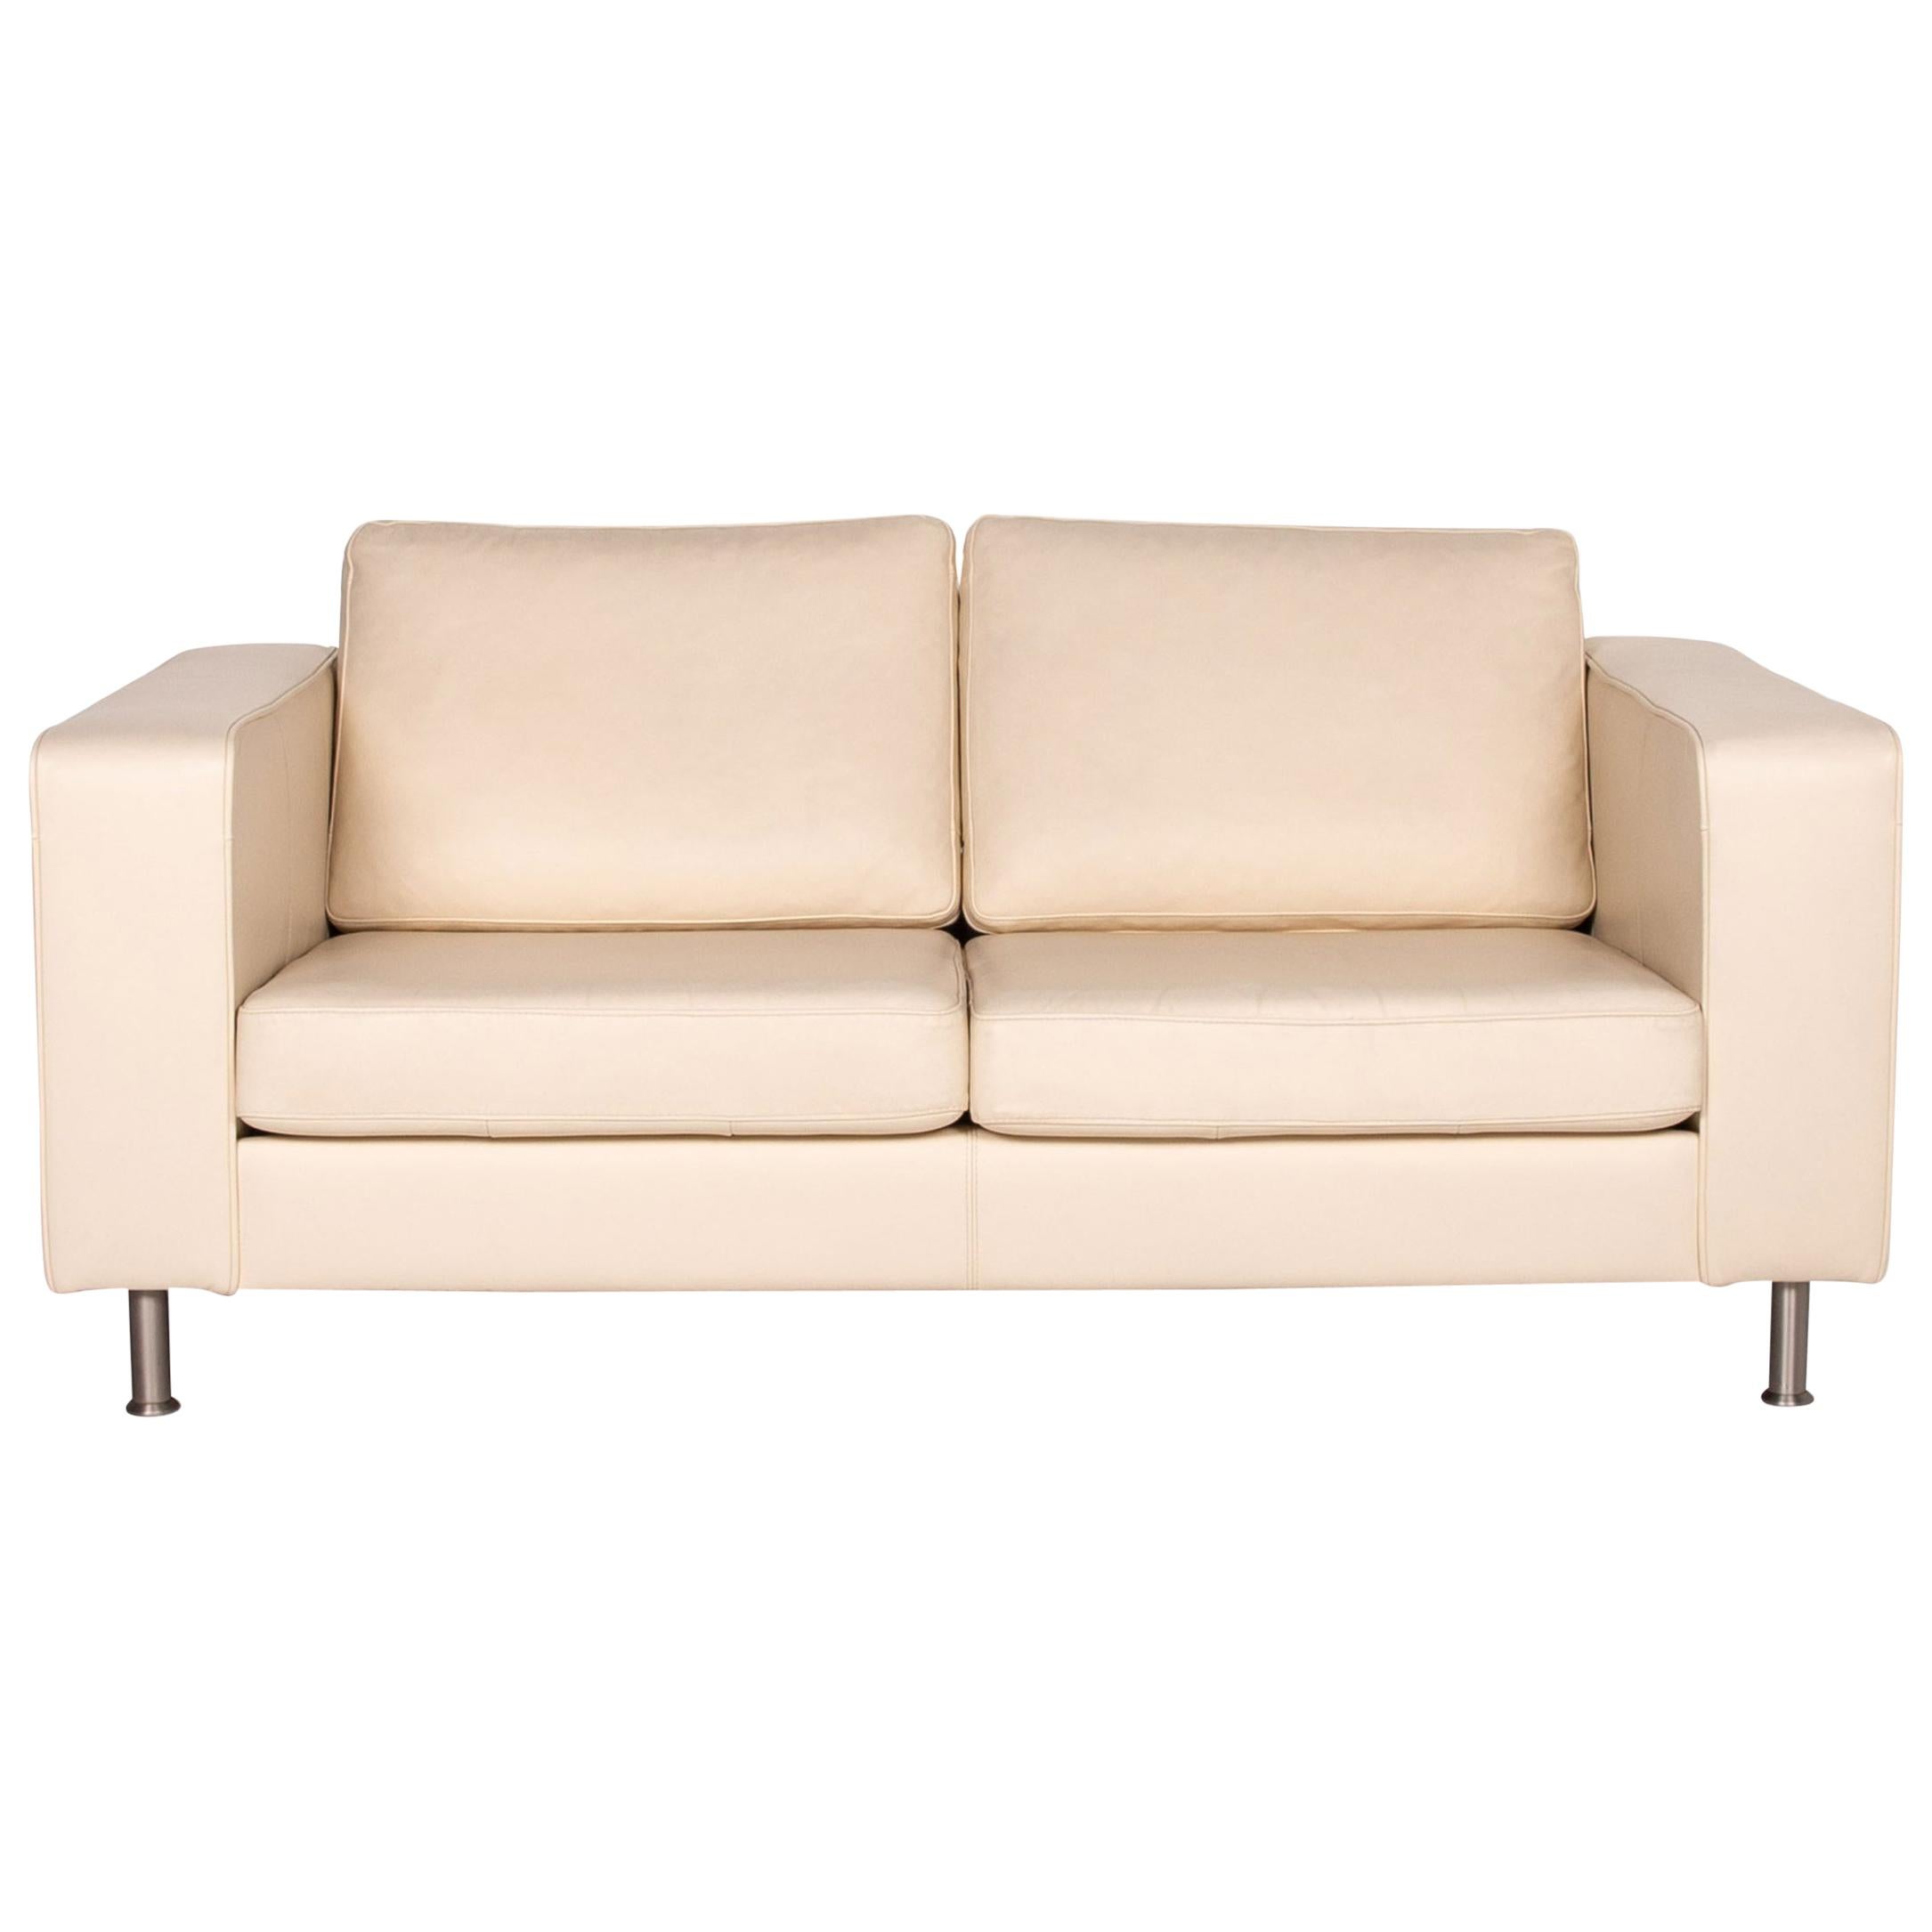 BoConcept Leather Sofa Cream Two-Seat Couch For Sale